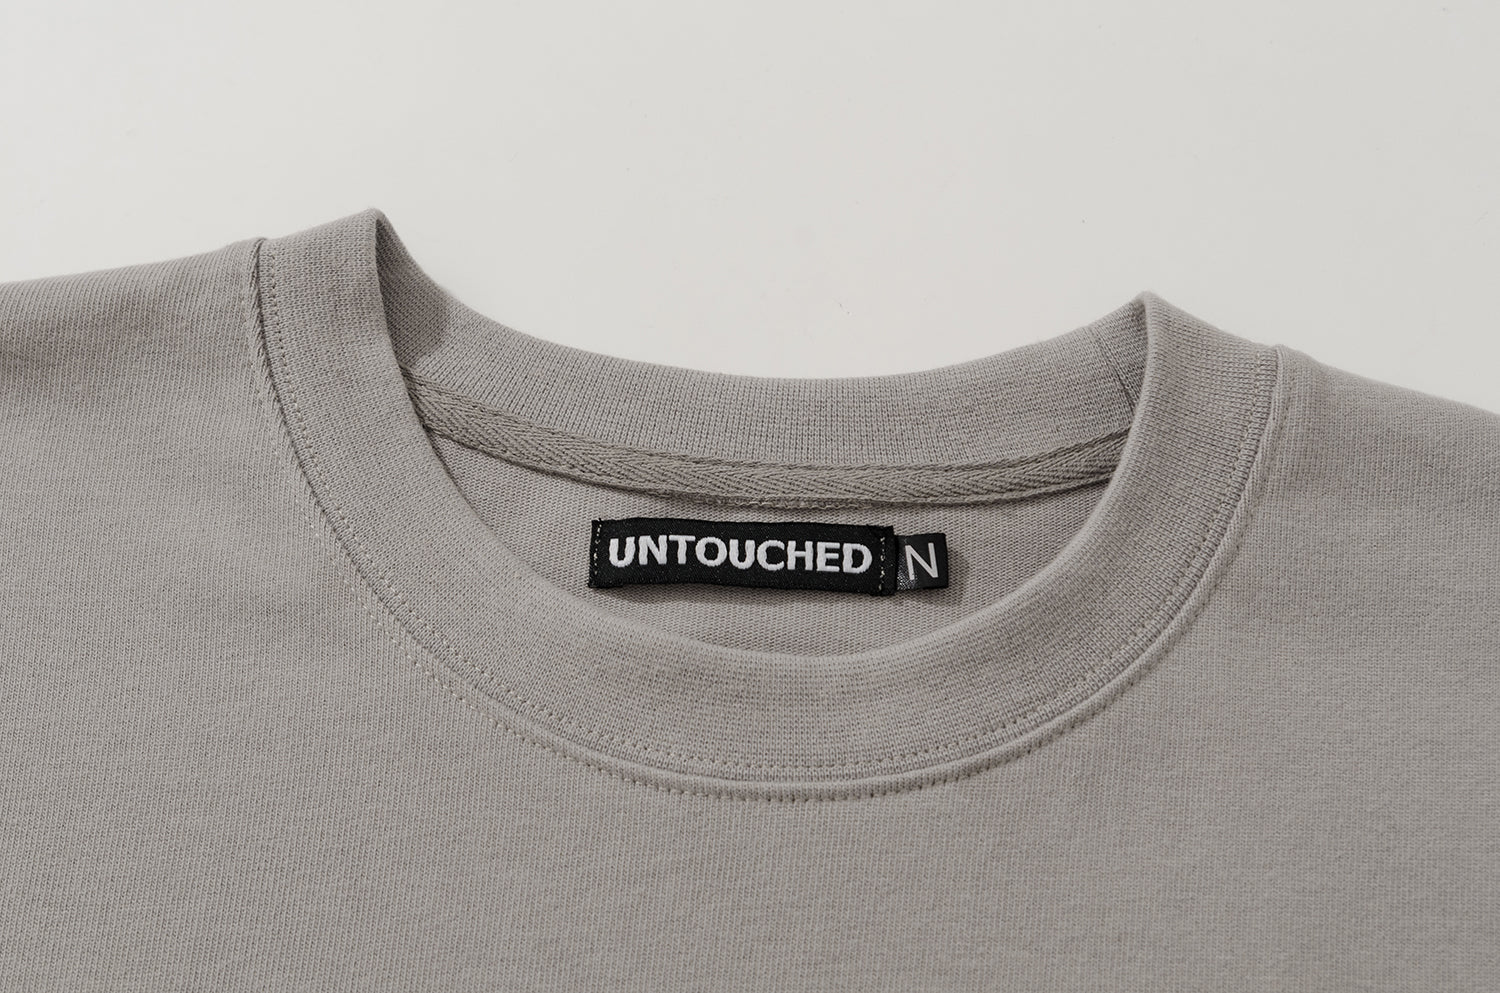 NW221LG | FUCKWHATPEOPLETHINK LIGHT GREY TEE | NOT WORKING V